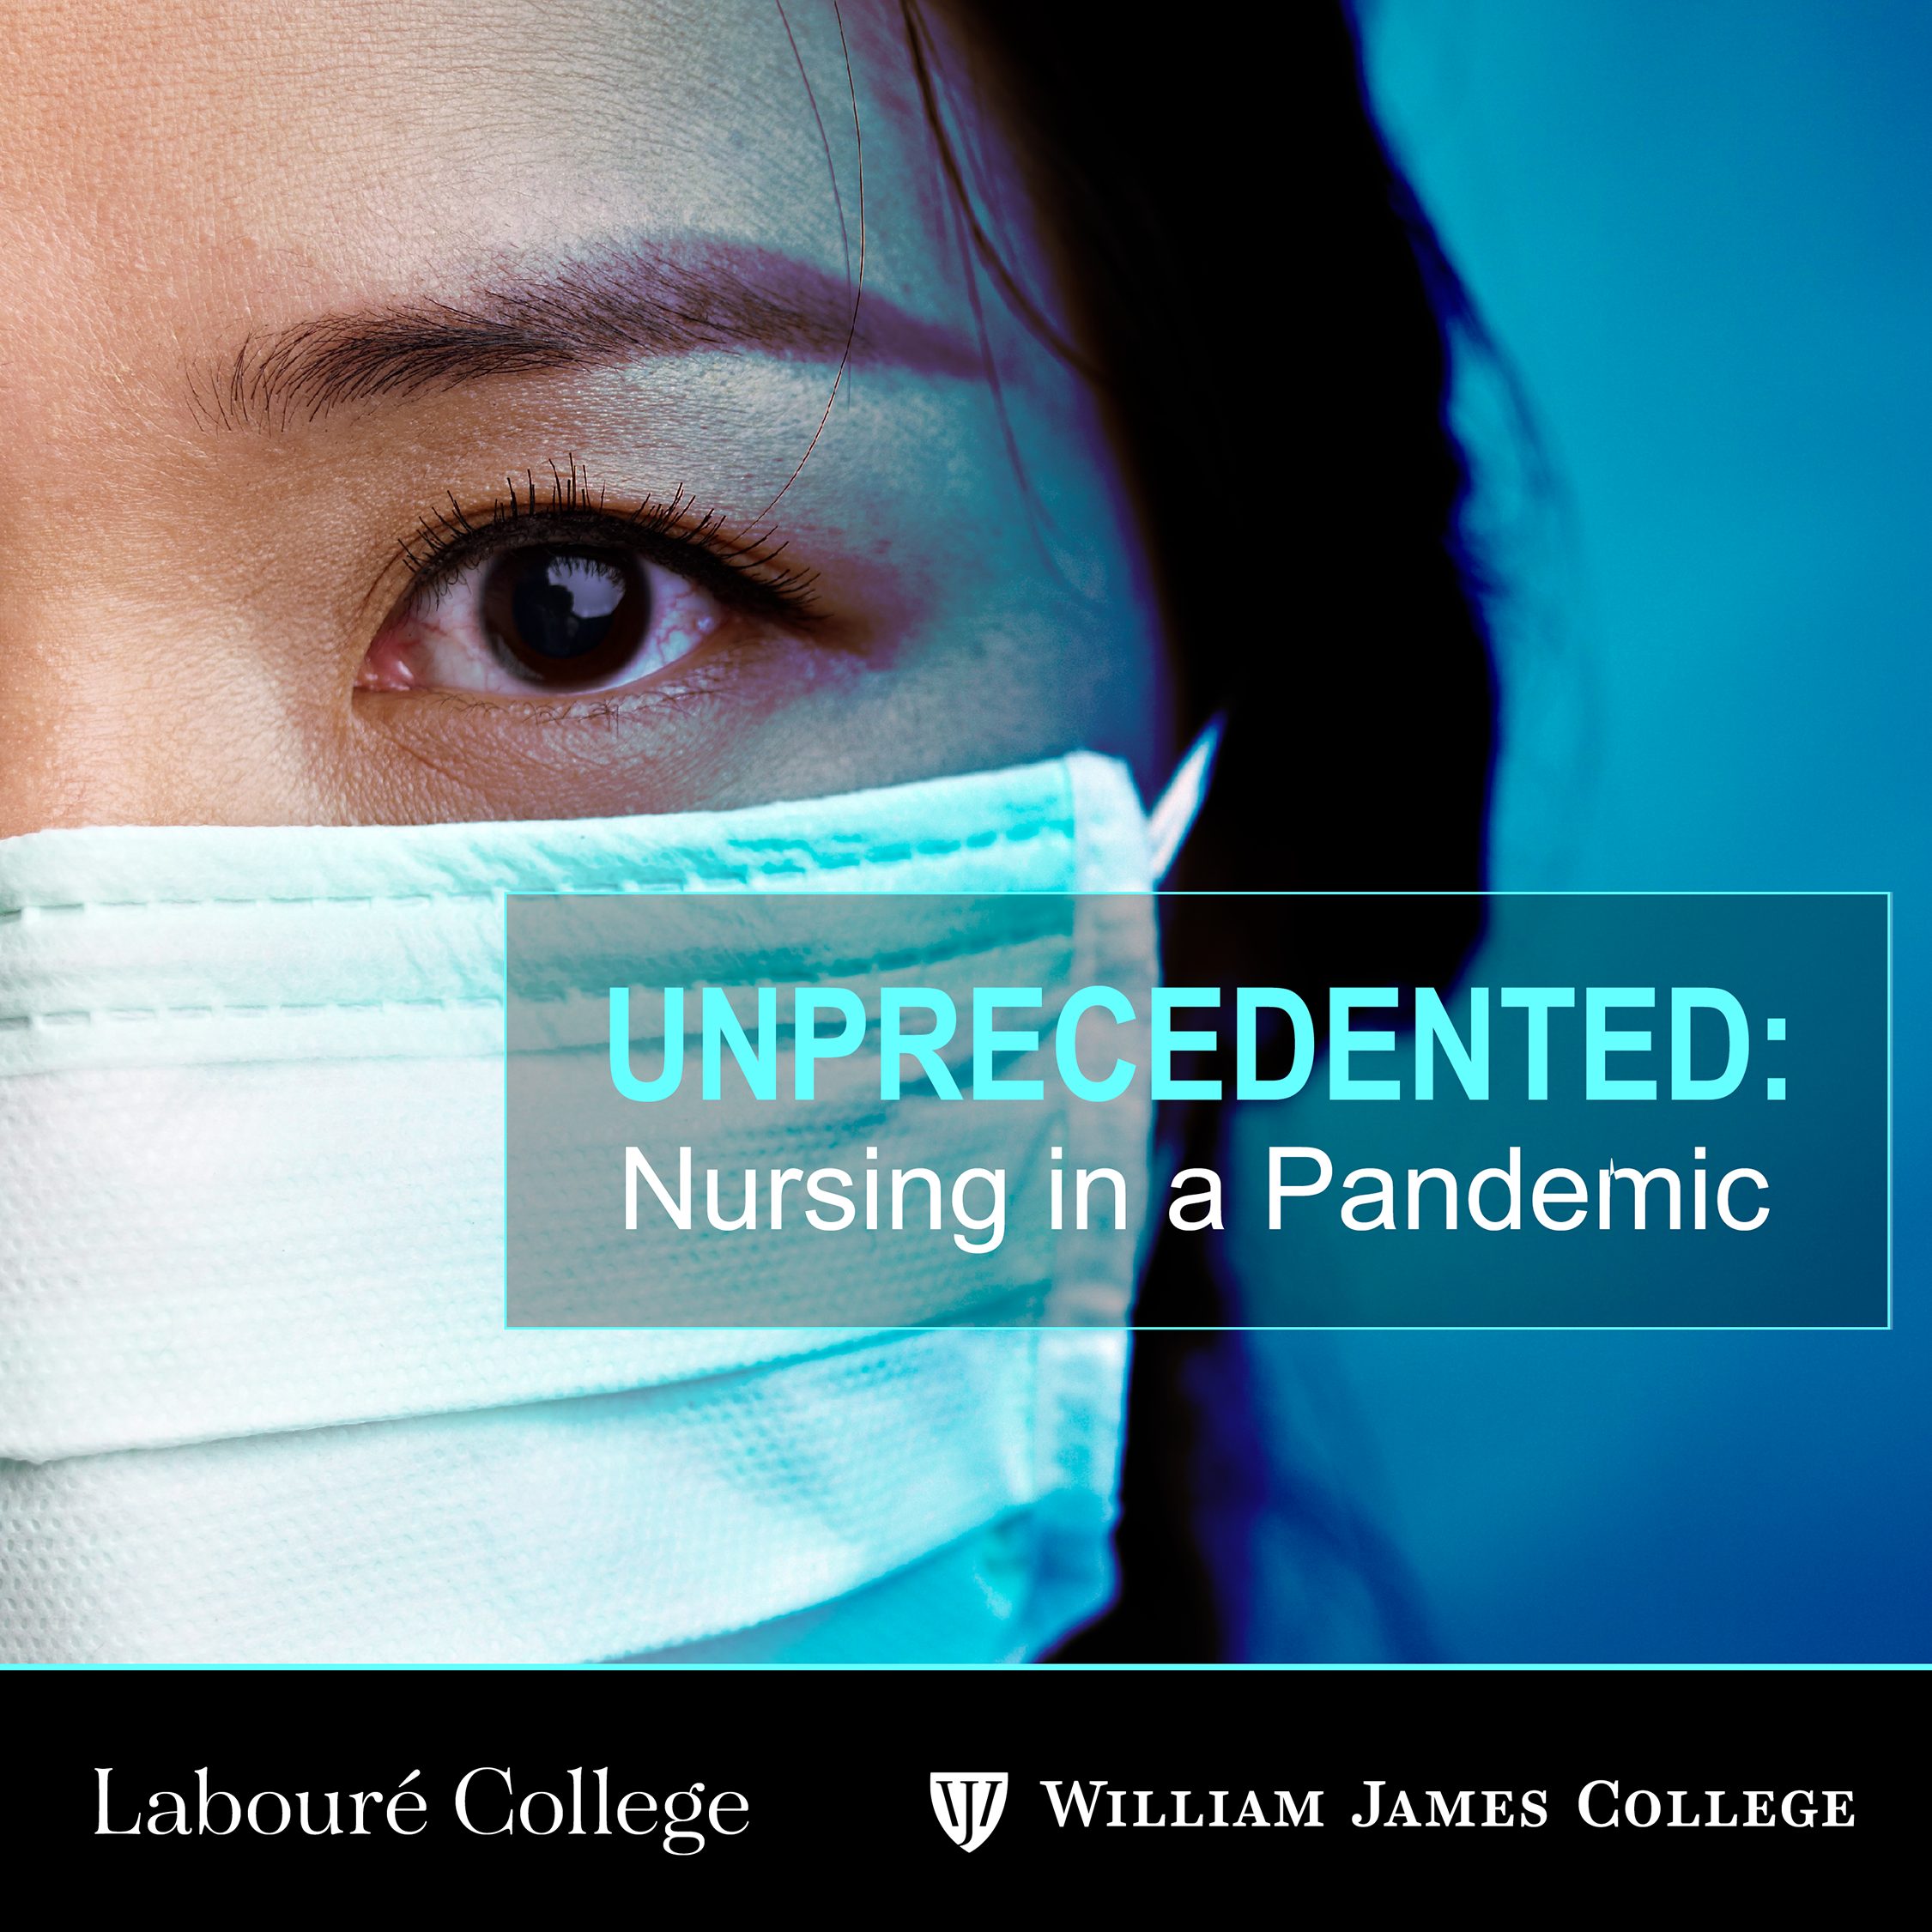 “Unprecedented: Nursing in a Pandemic” aims to make psychological care topics, along with tips and strategies for self-care, accessible to the working nurse. The podcast is a collaboration by Labouré College, a leader in nursing and healthcare education, and William James College, a leader in mental and behavioral healthcare education, both located in Greater Boston.